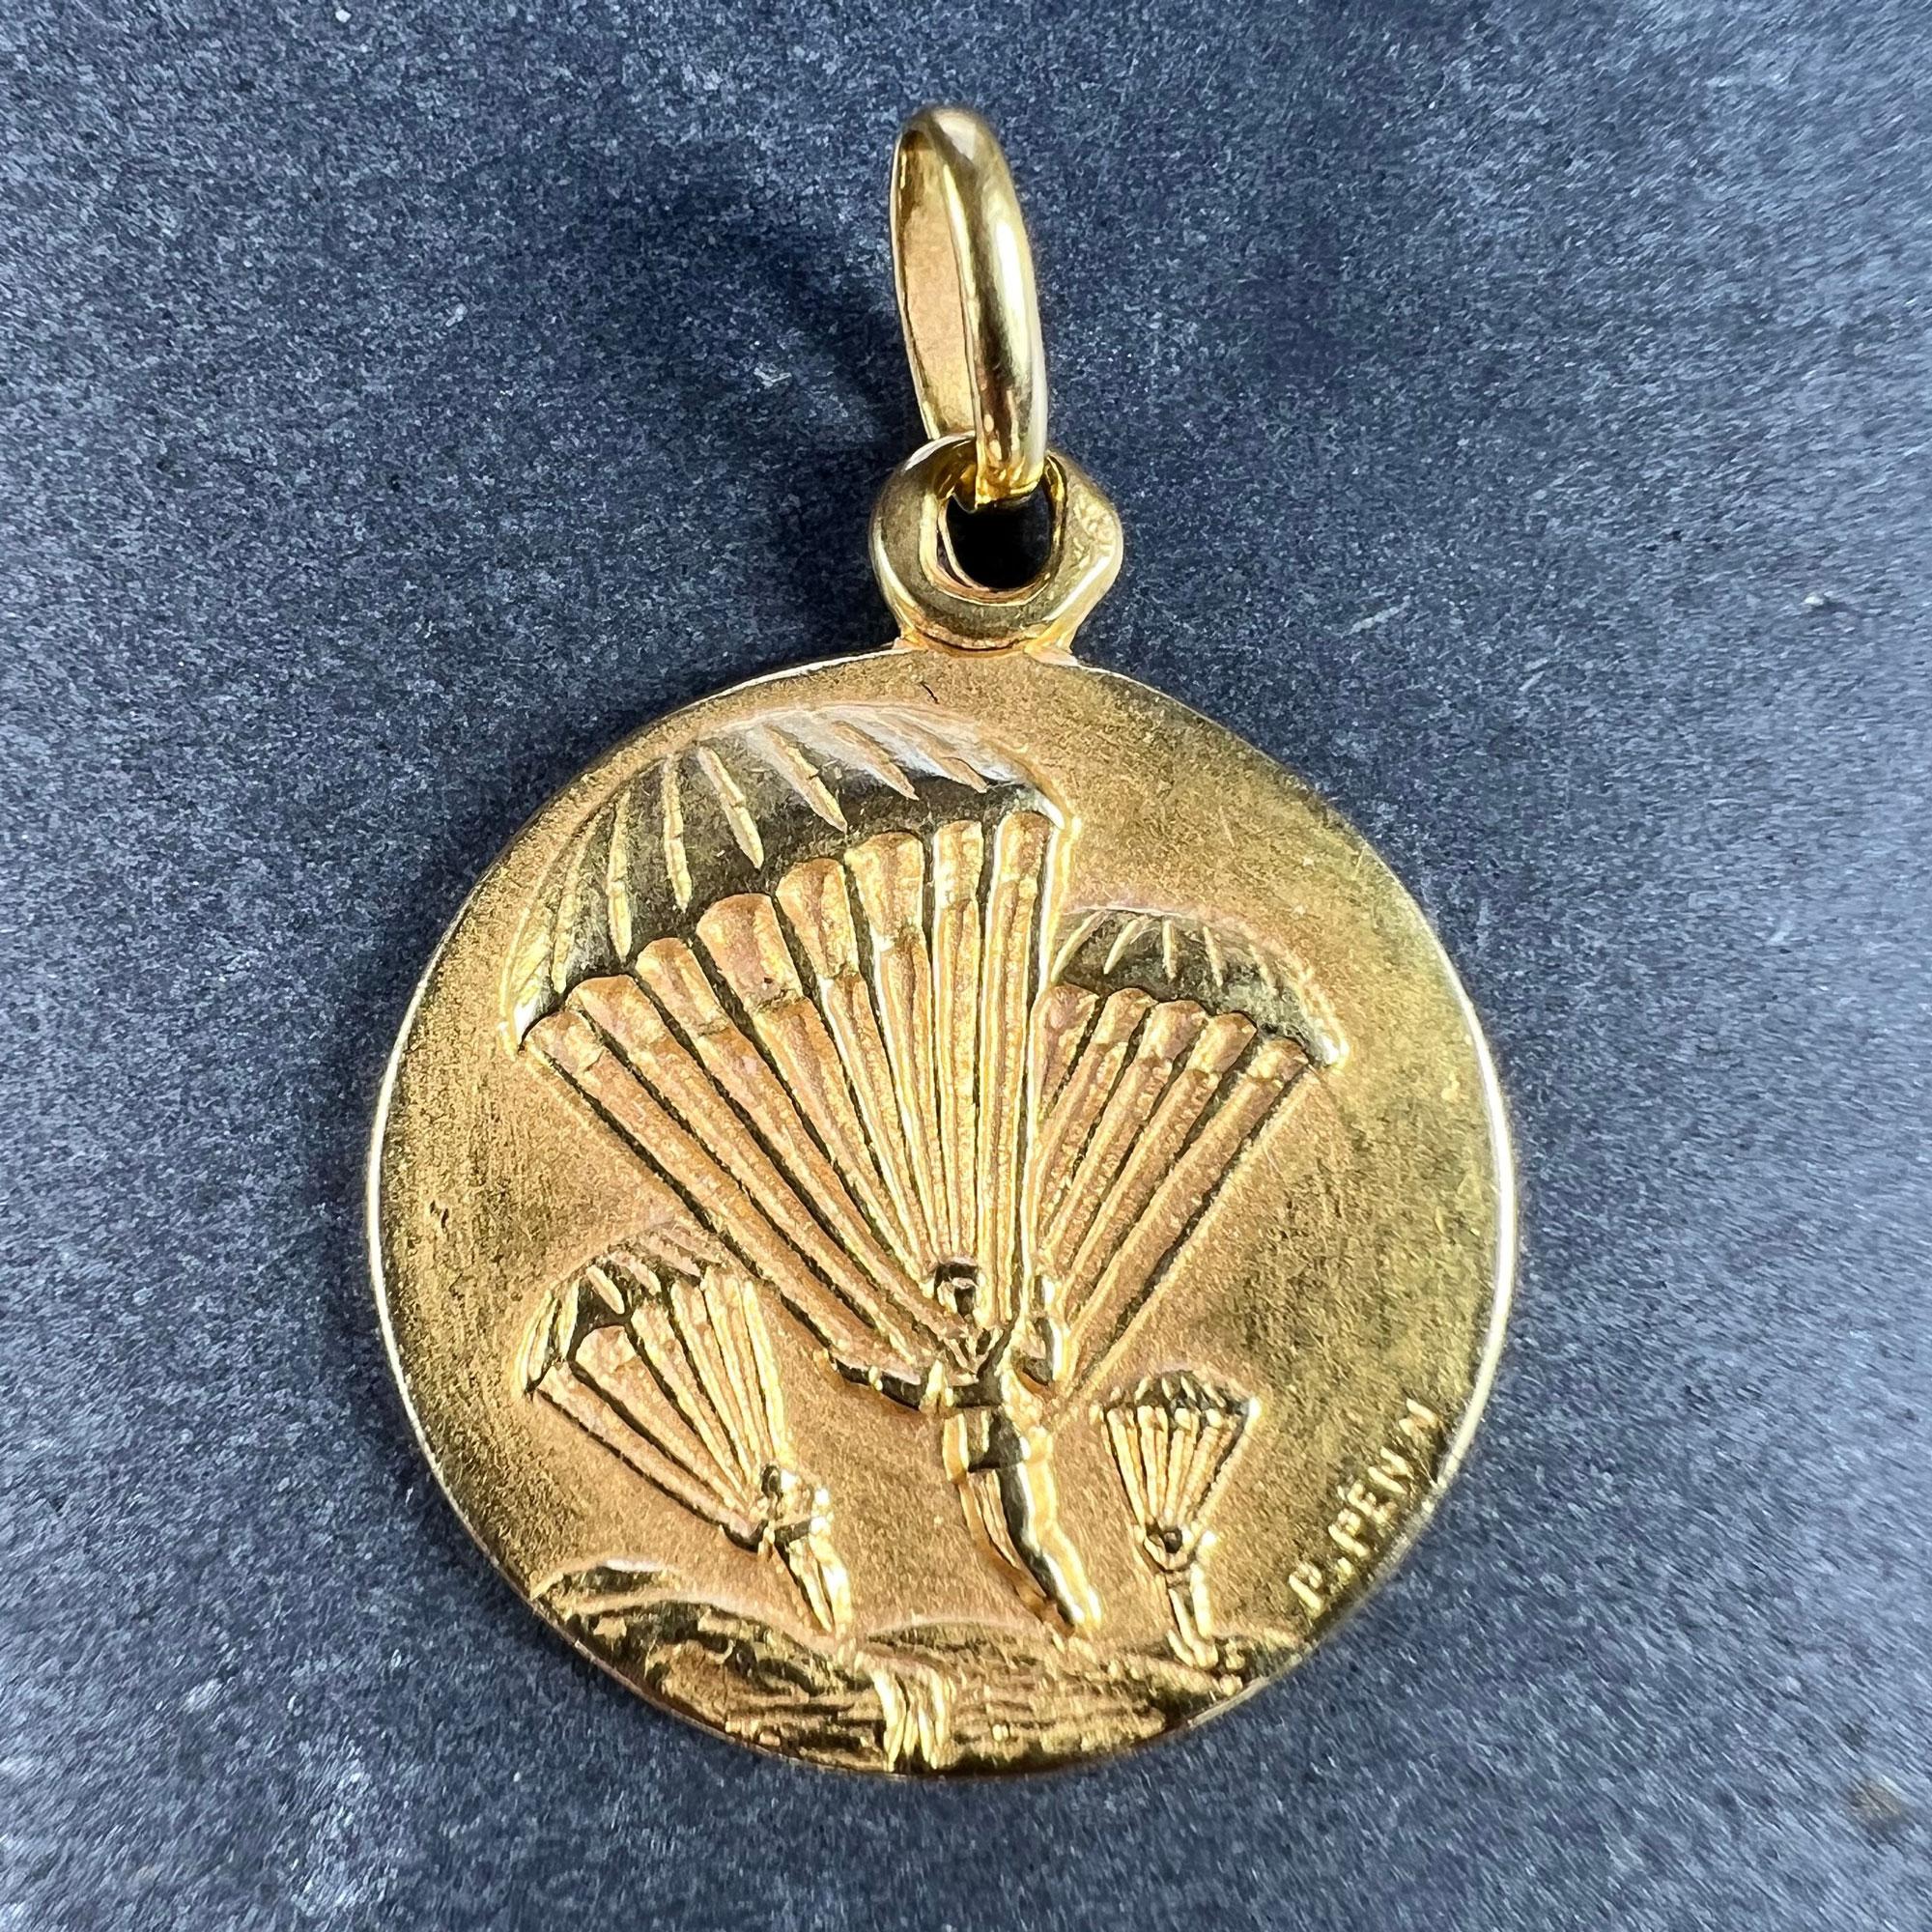 A French 18 karat (18K) yellow gold charm pendant depicting a military regiment descending on a landscape by parachute. The reverse depicts Saint Michael defeating Satan with the phrase 'S. MICHAEL ARCHANG O.P.N.' (Saint Michael Archangel watch over